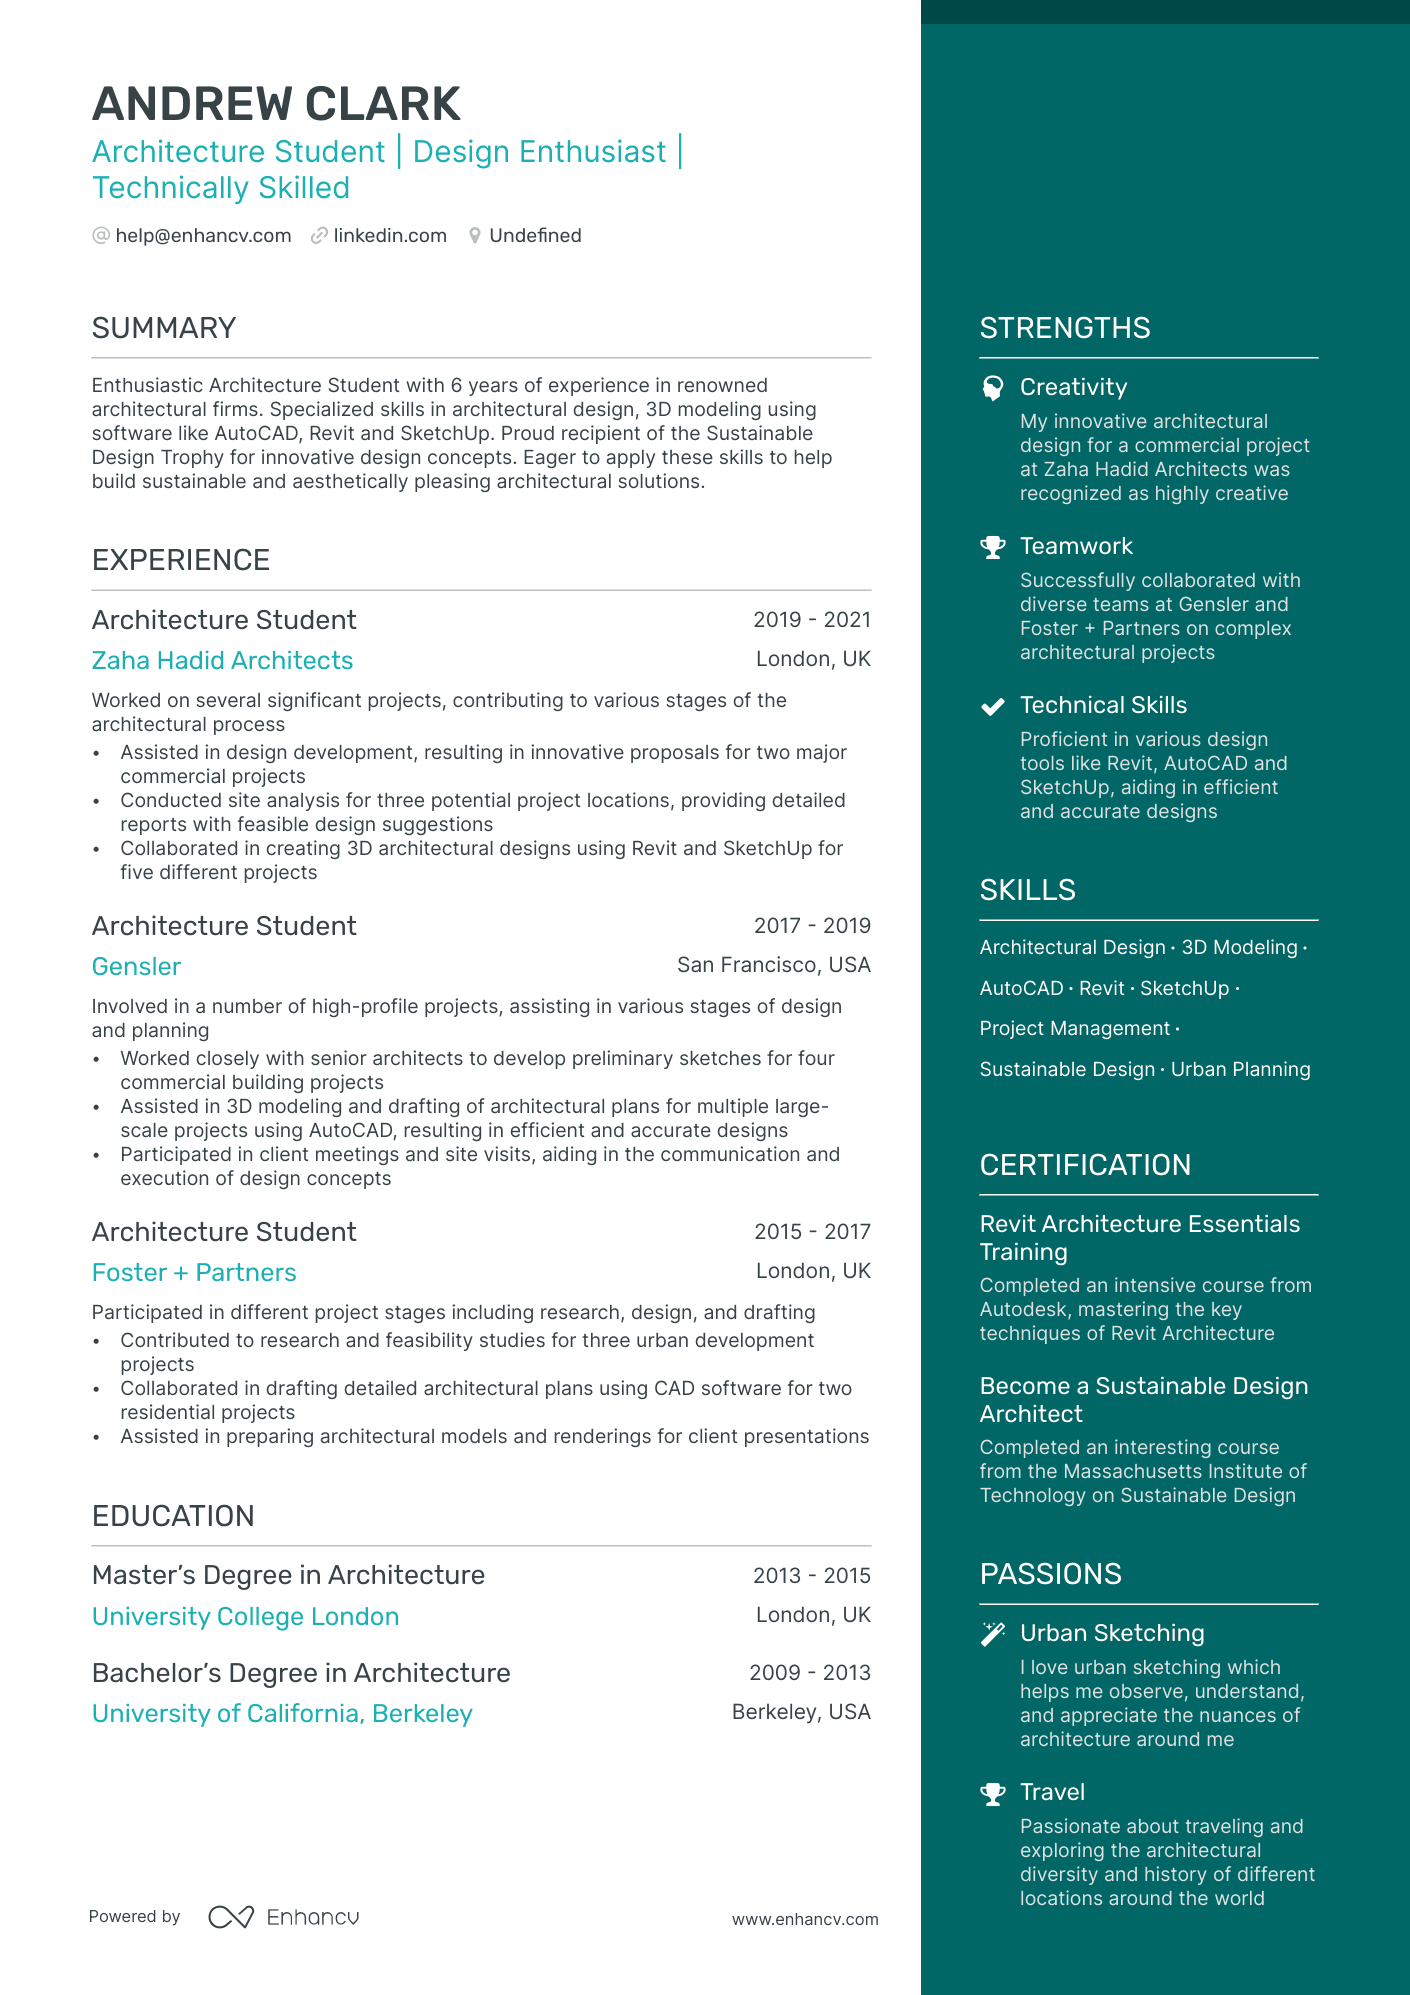 Architecture Student resume example